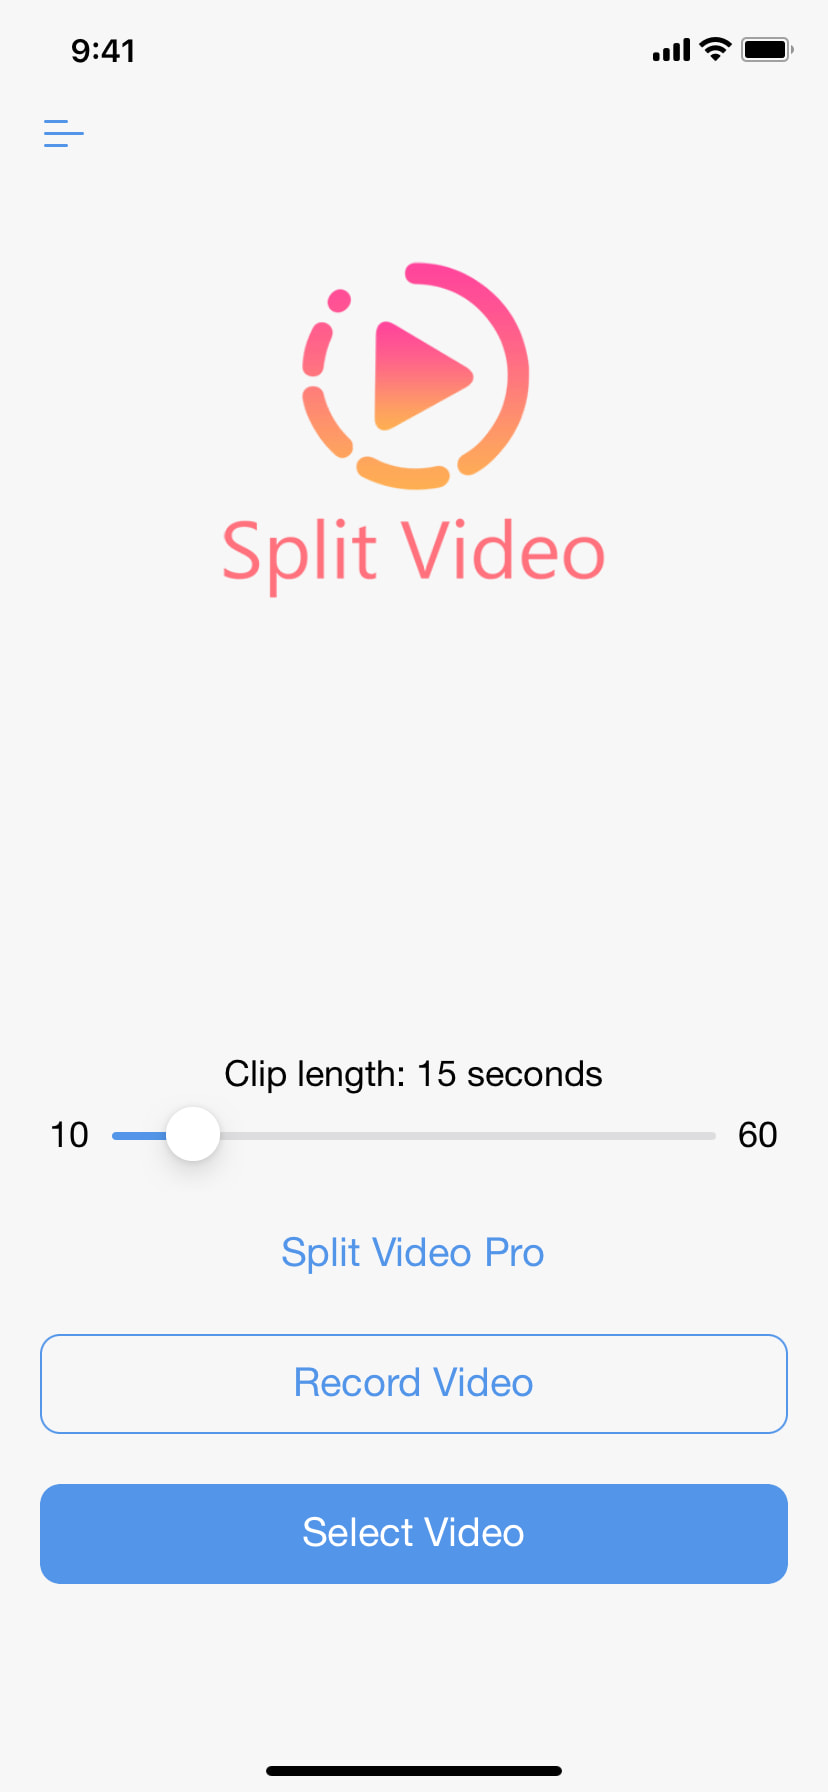 Select video to split for your Instagram story